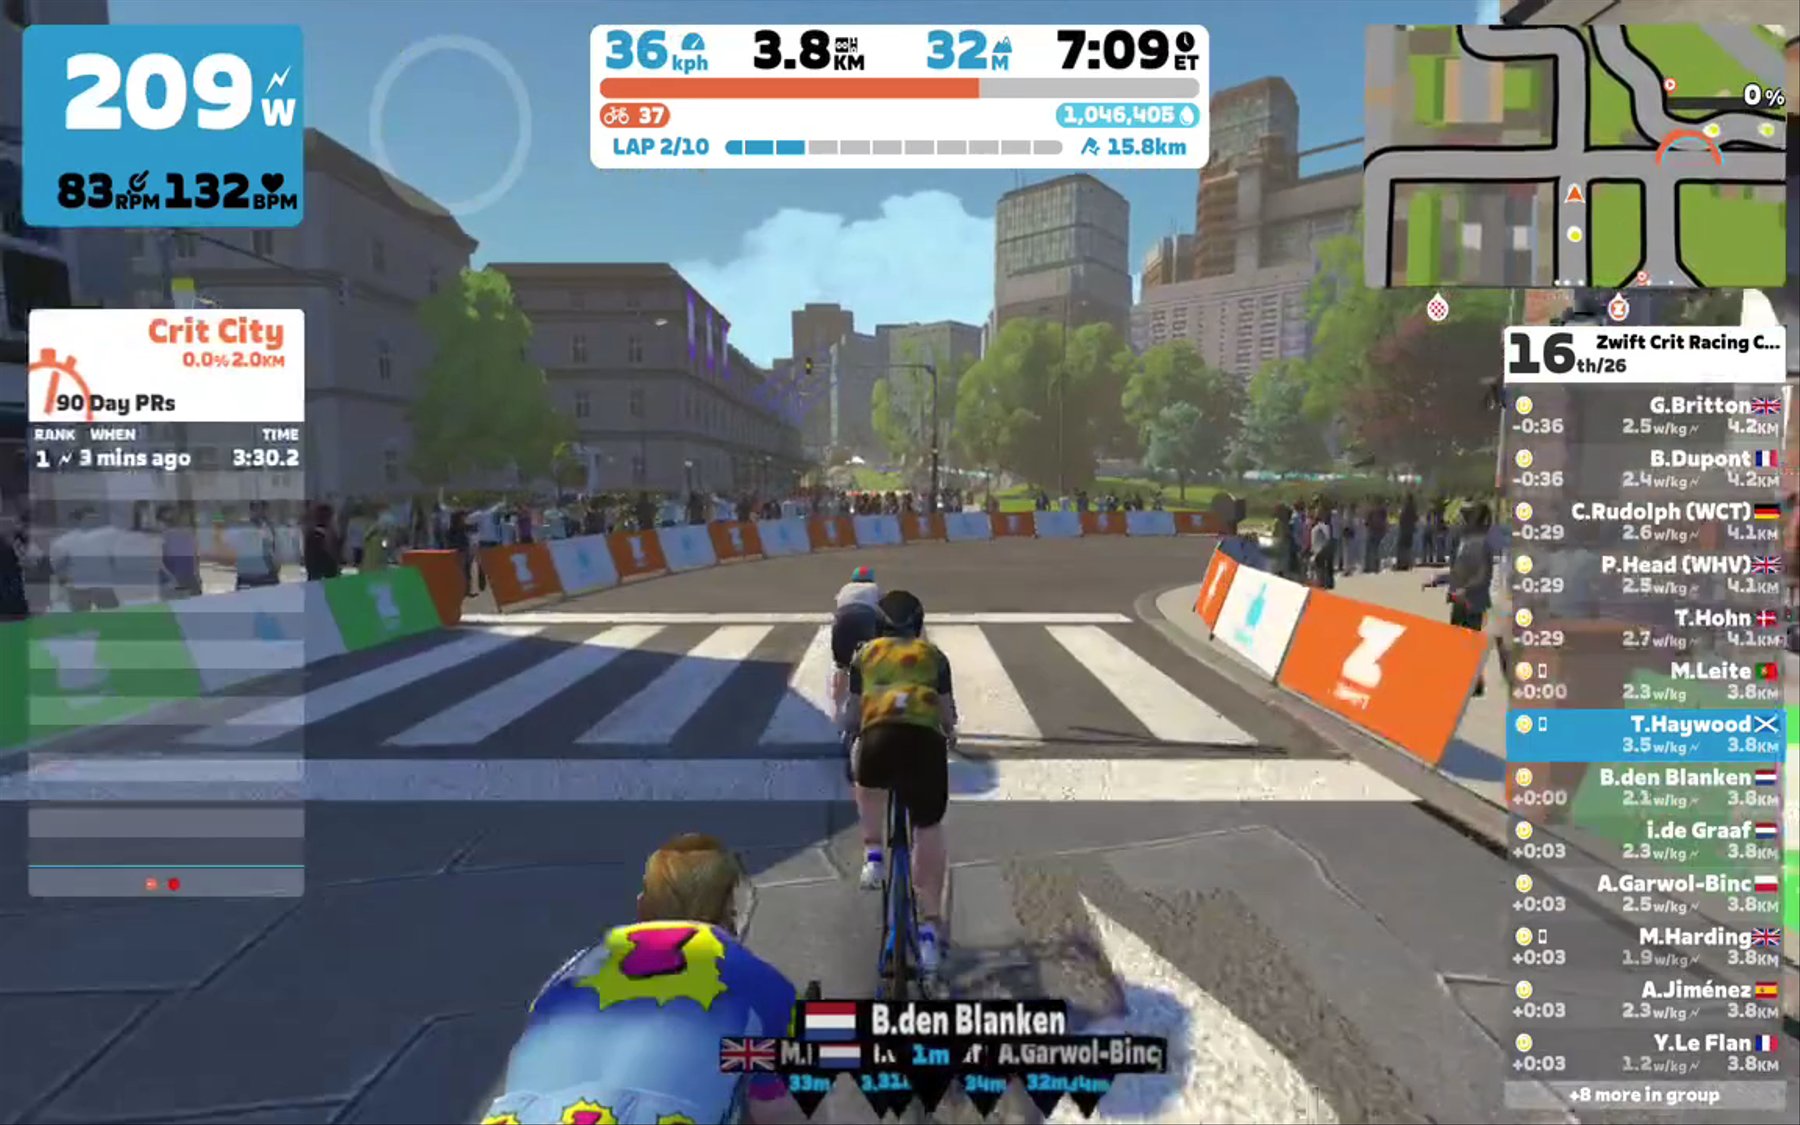 Zwift - Race: Zwift Crit Racing Club - The Bell Lap (D) on The Bell Lap in Crit City